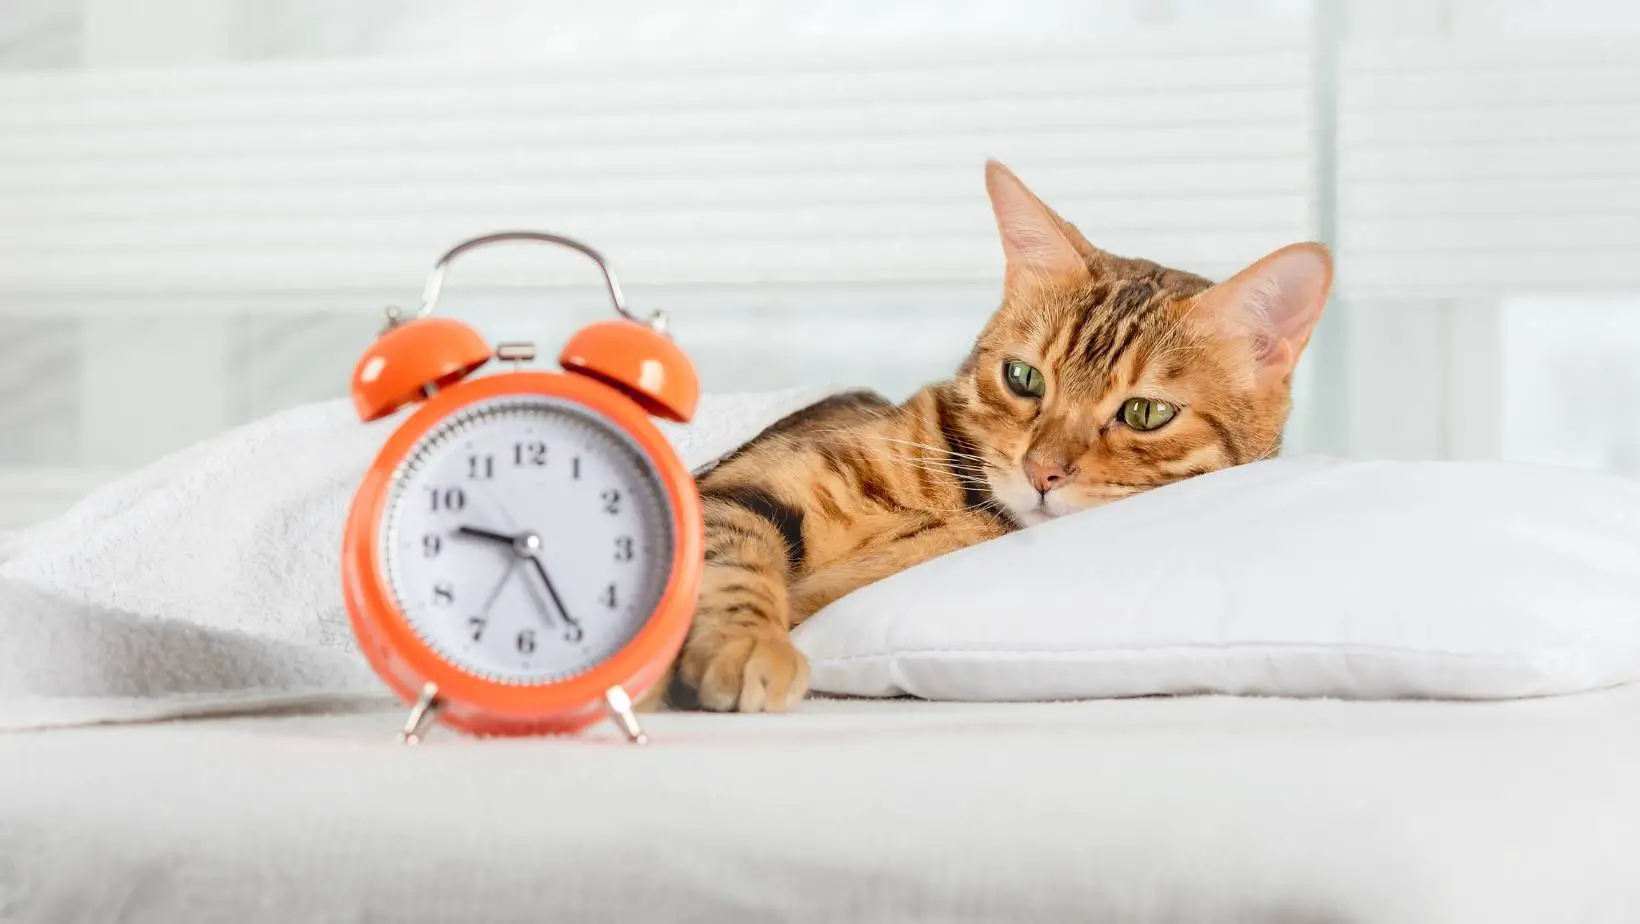 How Do Cats Perceive Time?